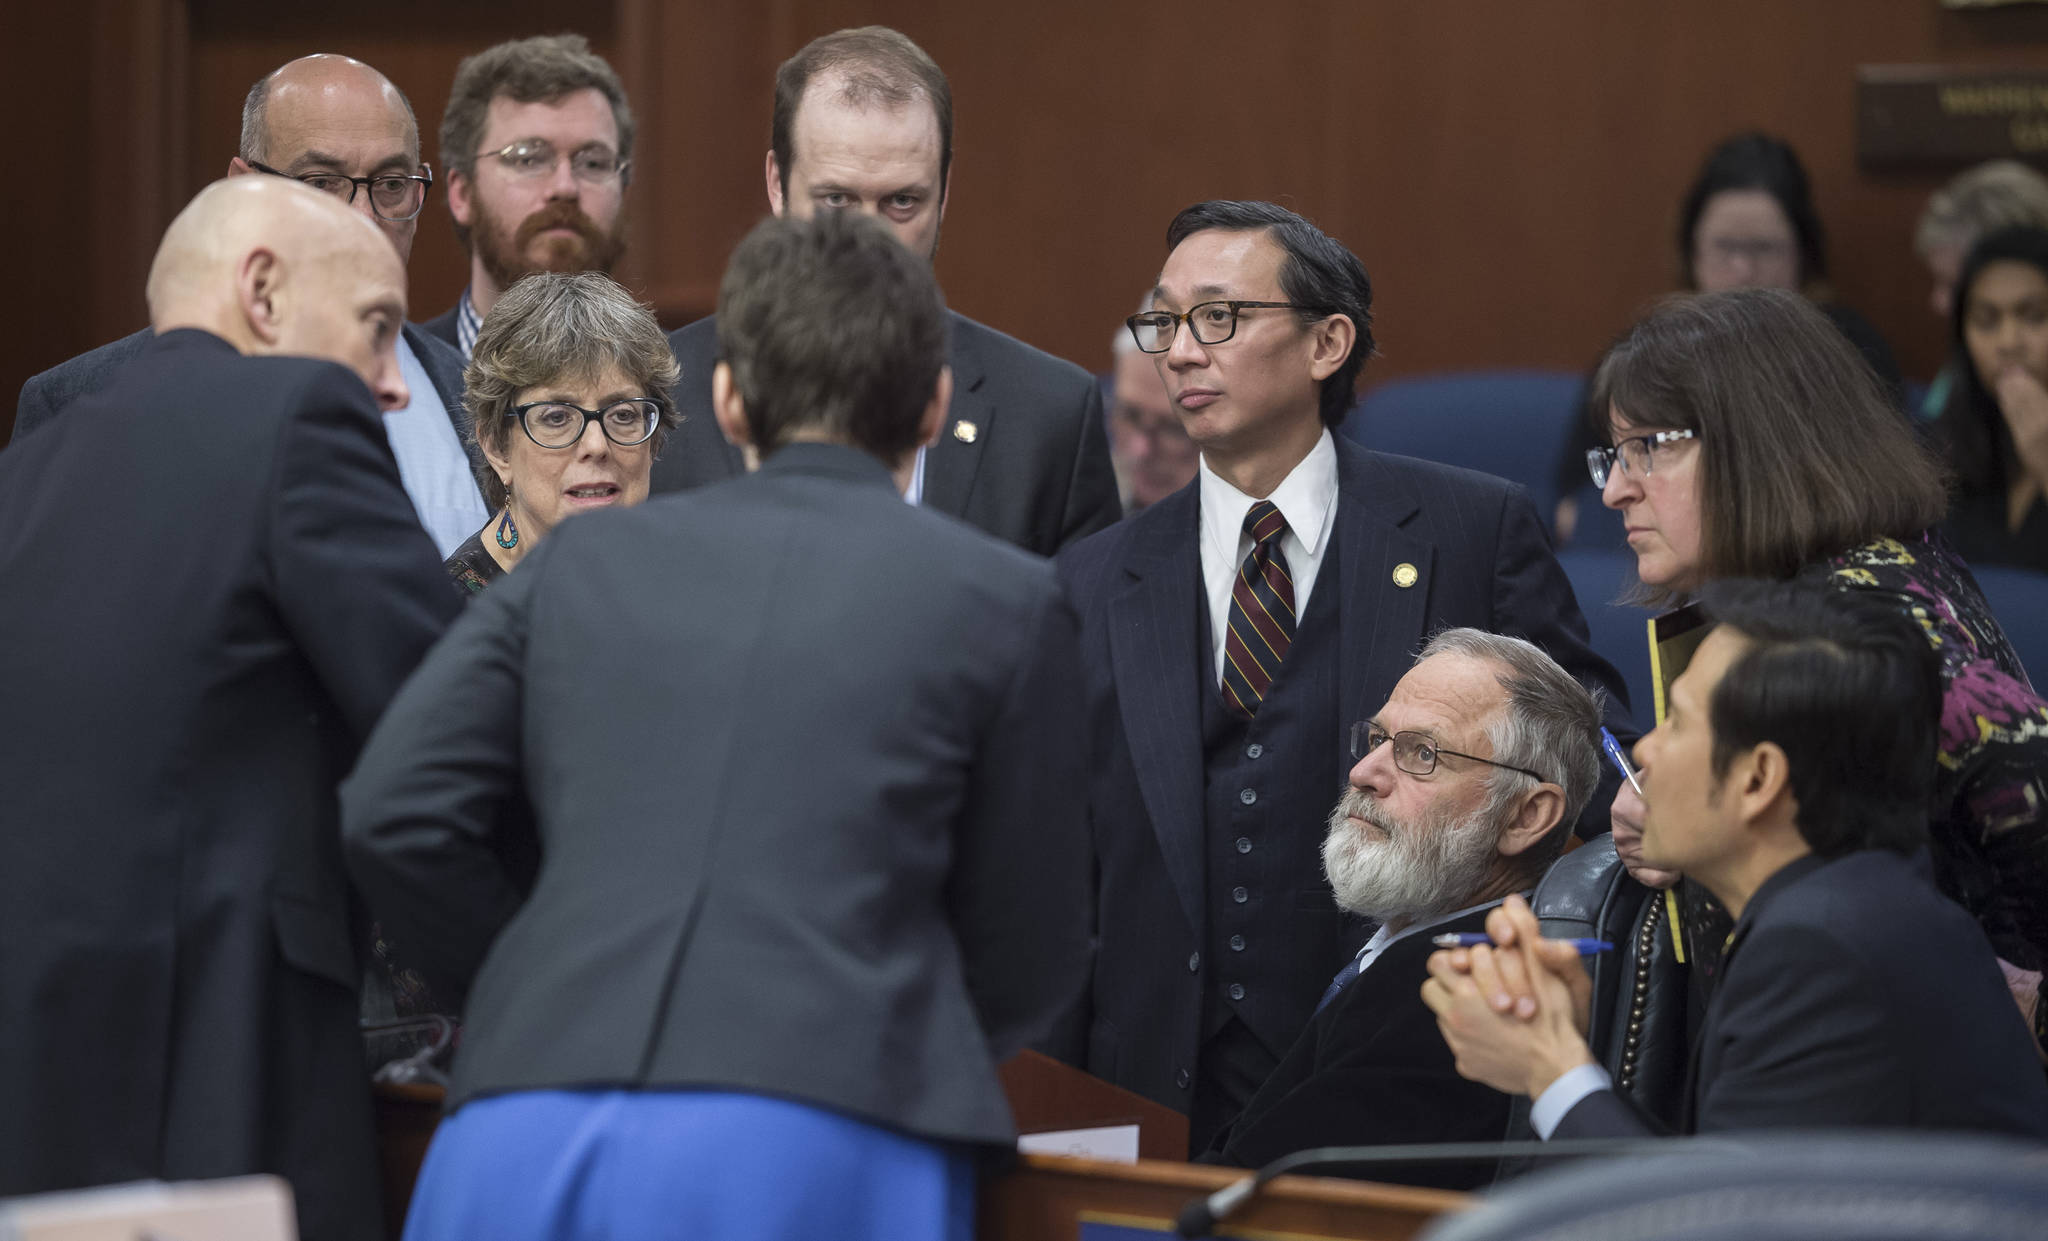 Michael Penn | Juneau Empire  Members of the House Majority Caucus speak to each other during a break in debate on the House education bill at the Capitol on Wednesday.